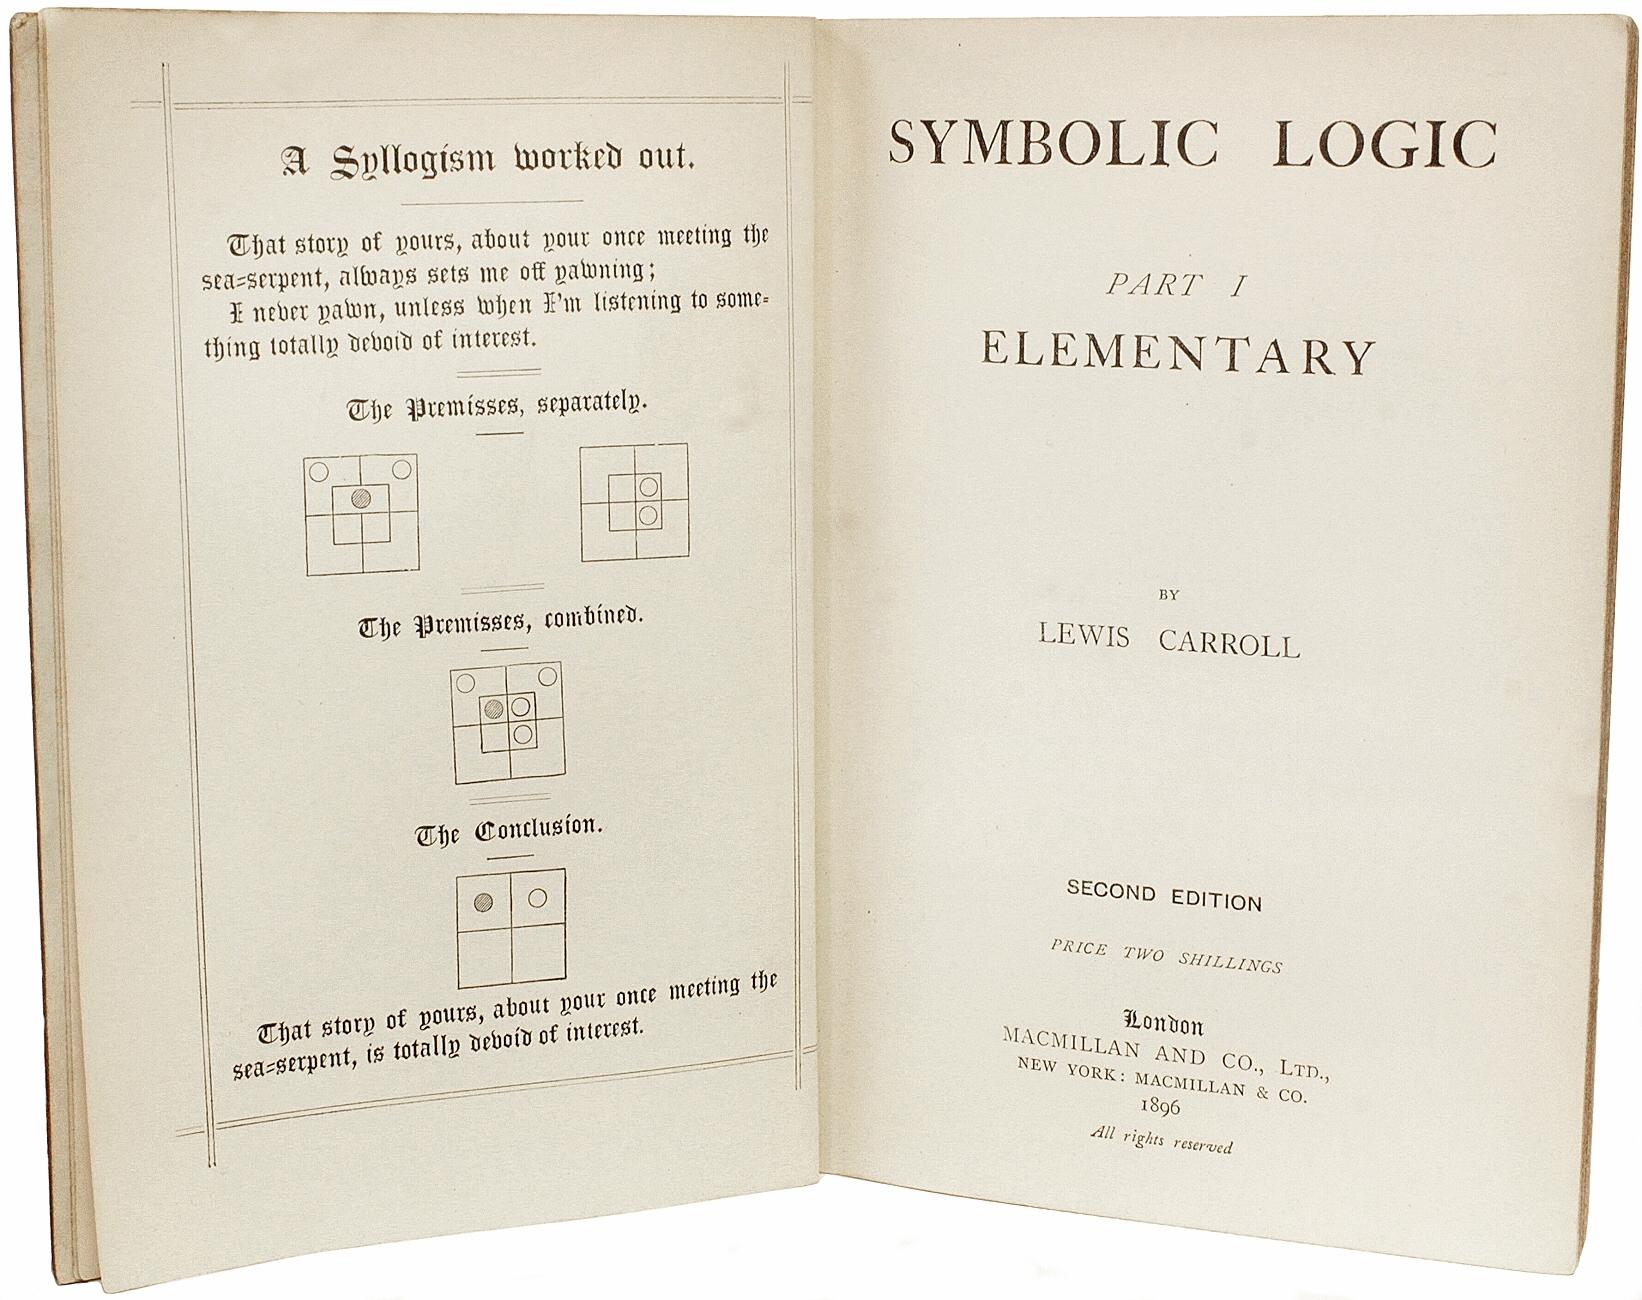 AUTHOR: DODGSON, Charles L (Lewis Carroll). 

TITLE: Symbolic Logic. Part I Elementary.

PUBLISHER: London: Macmillan & Co., 1896.

DESCRIPTION: SECOND EDITION PRESETATION COPY. 1 vol., illustrated with diagrams, inscribed by Dodgson on the